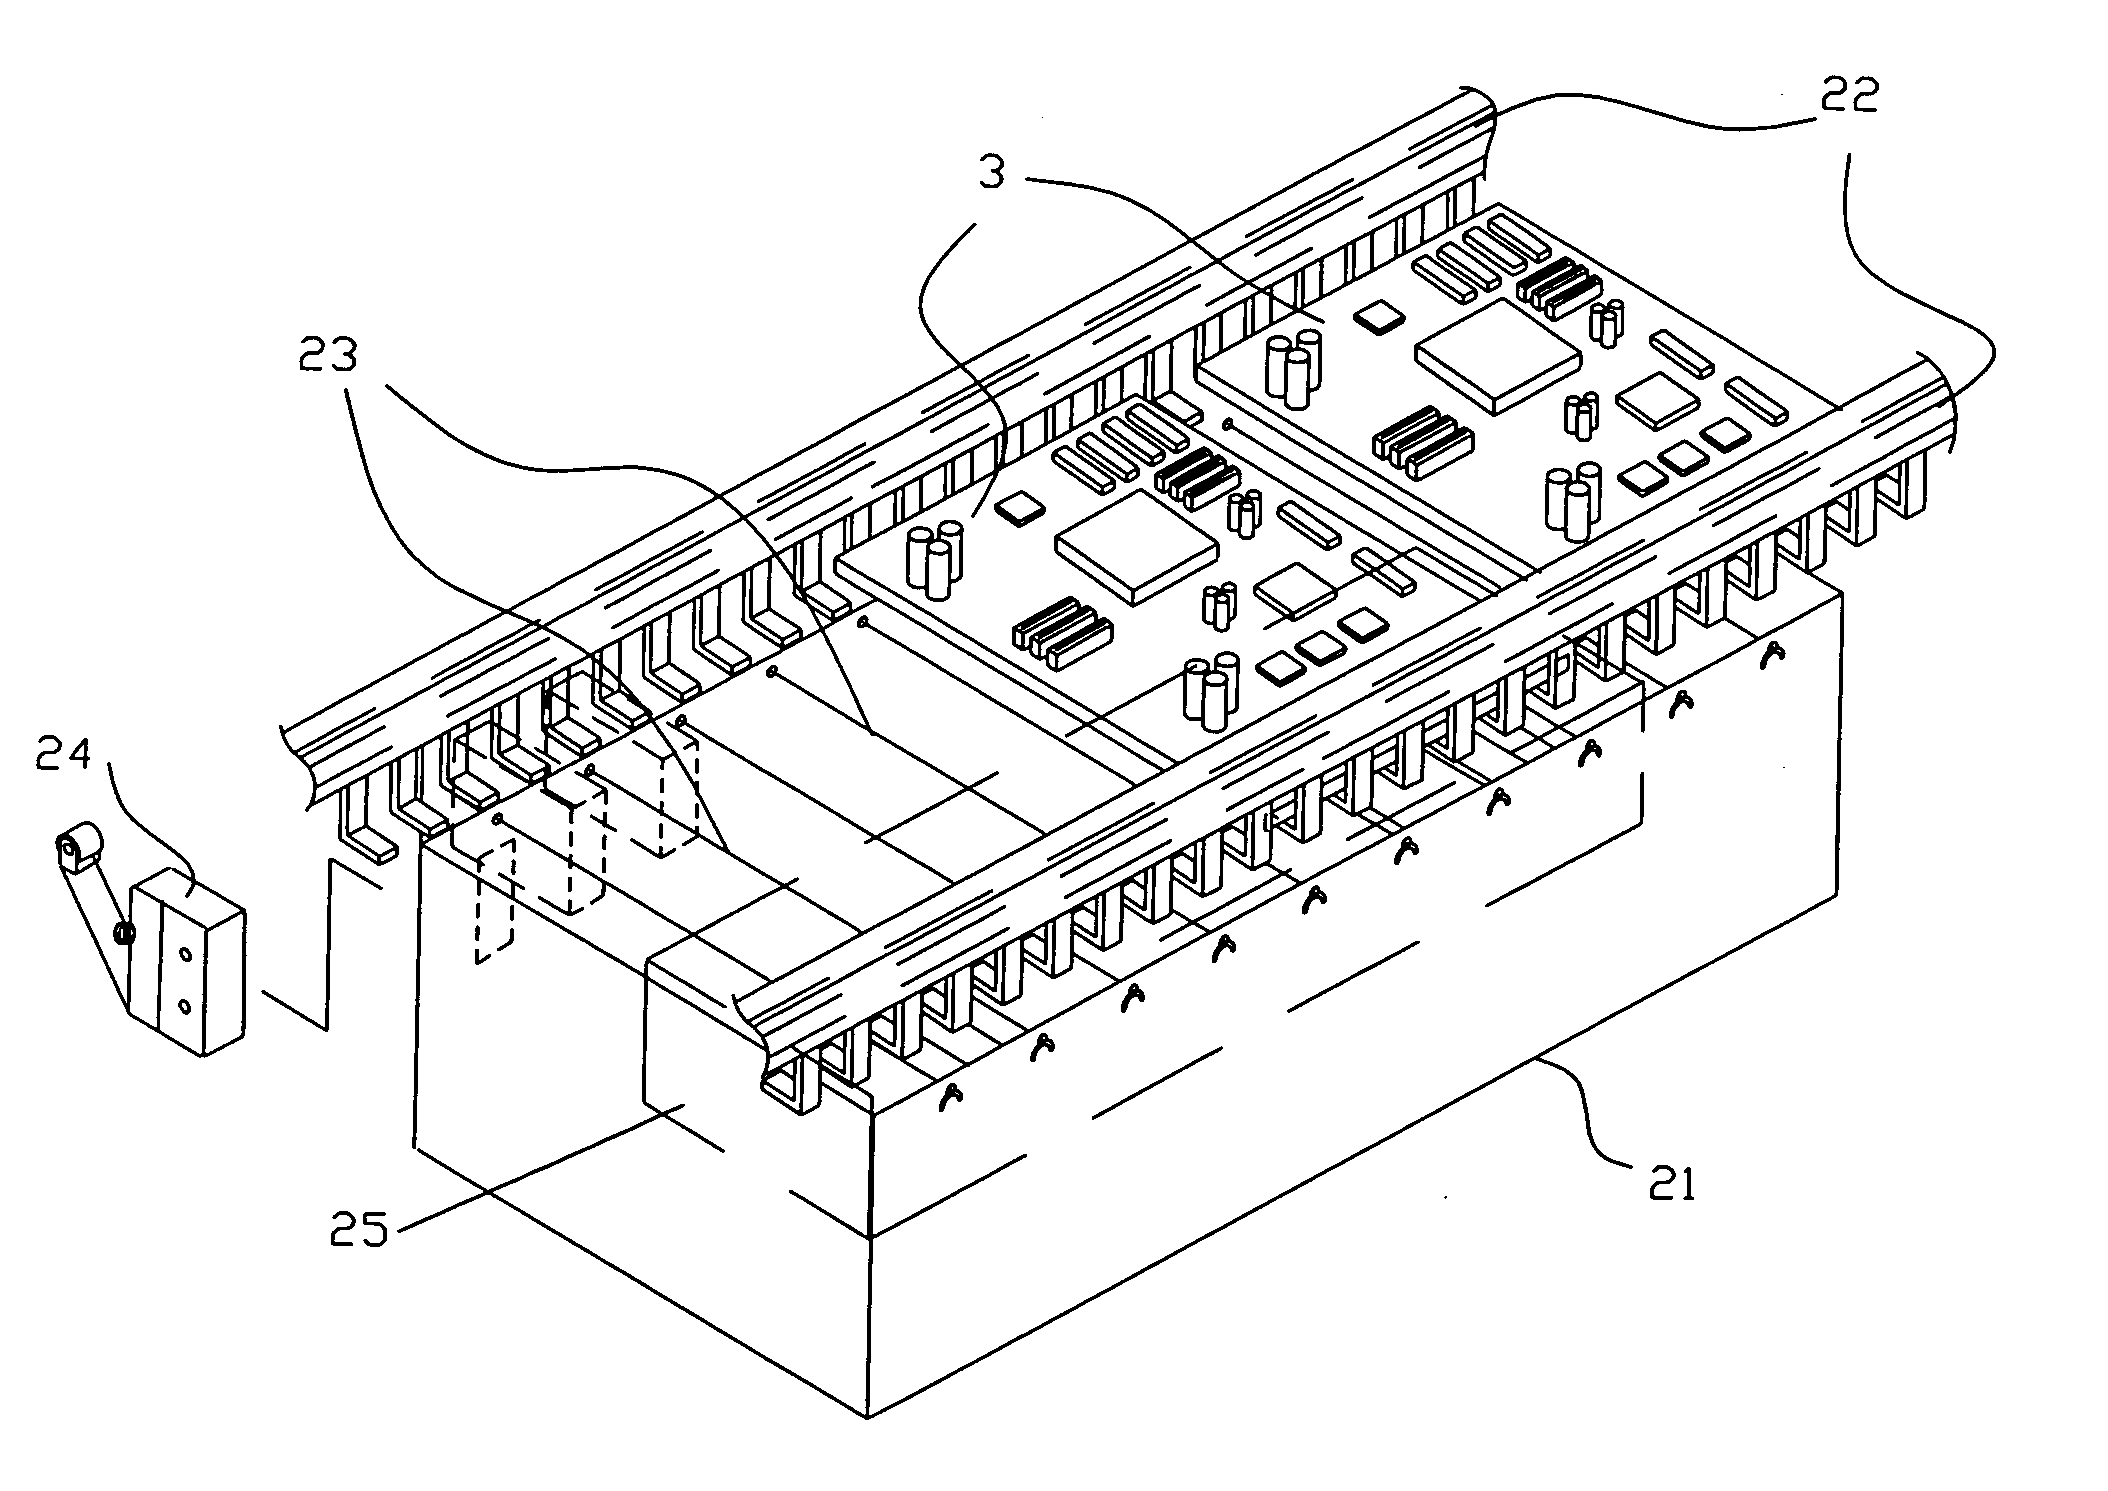 Production device and production equipment